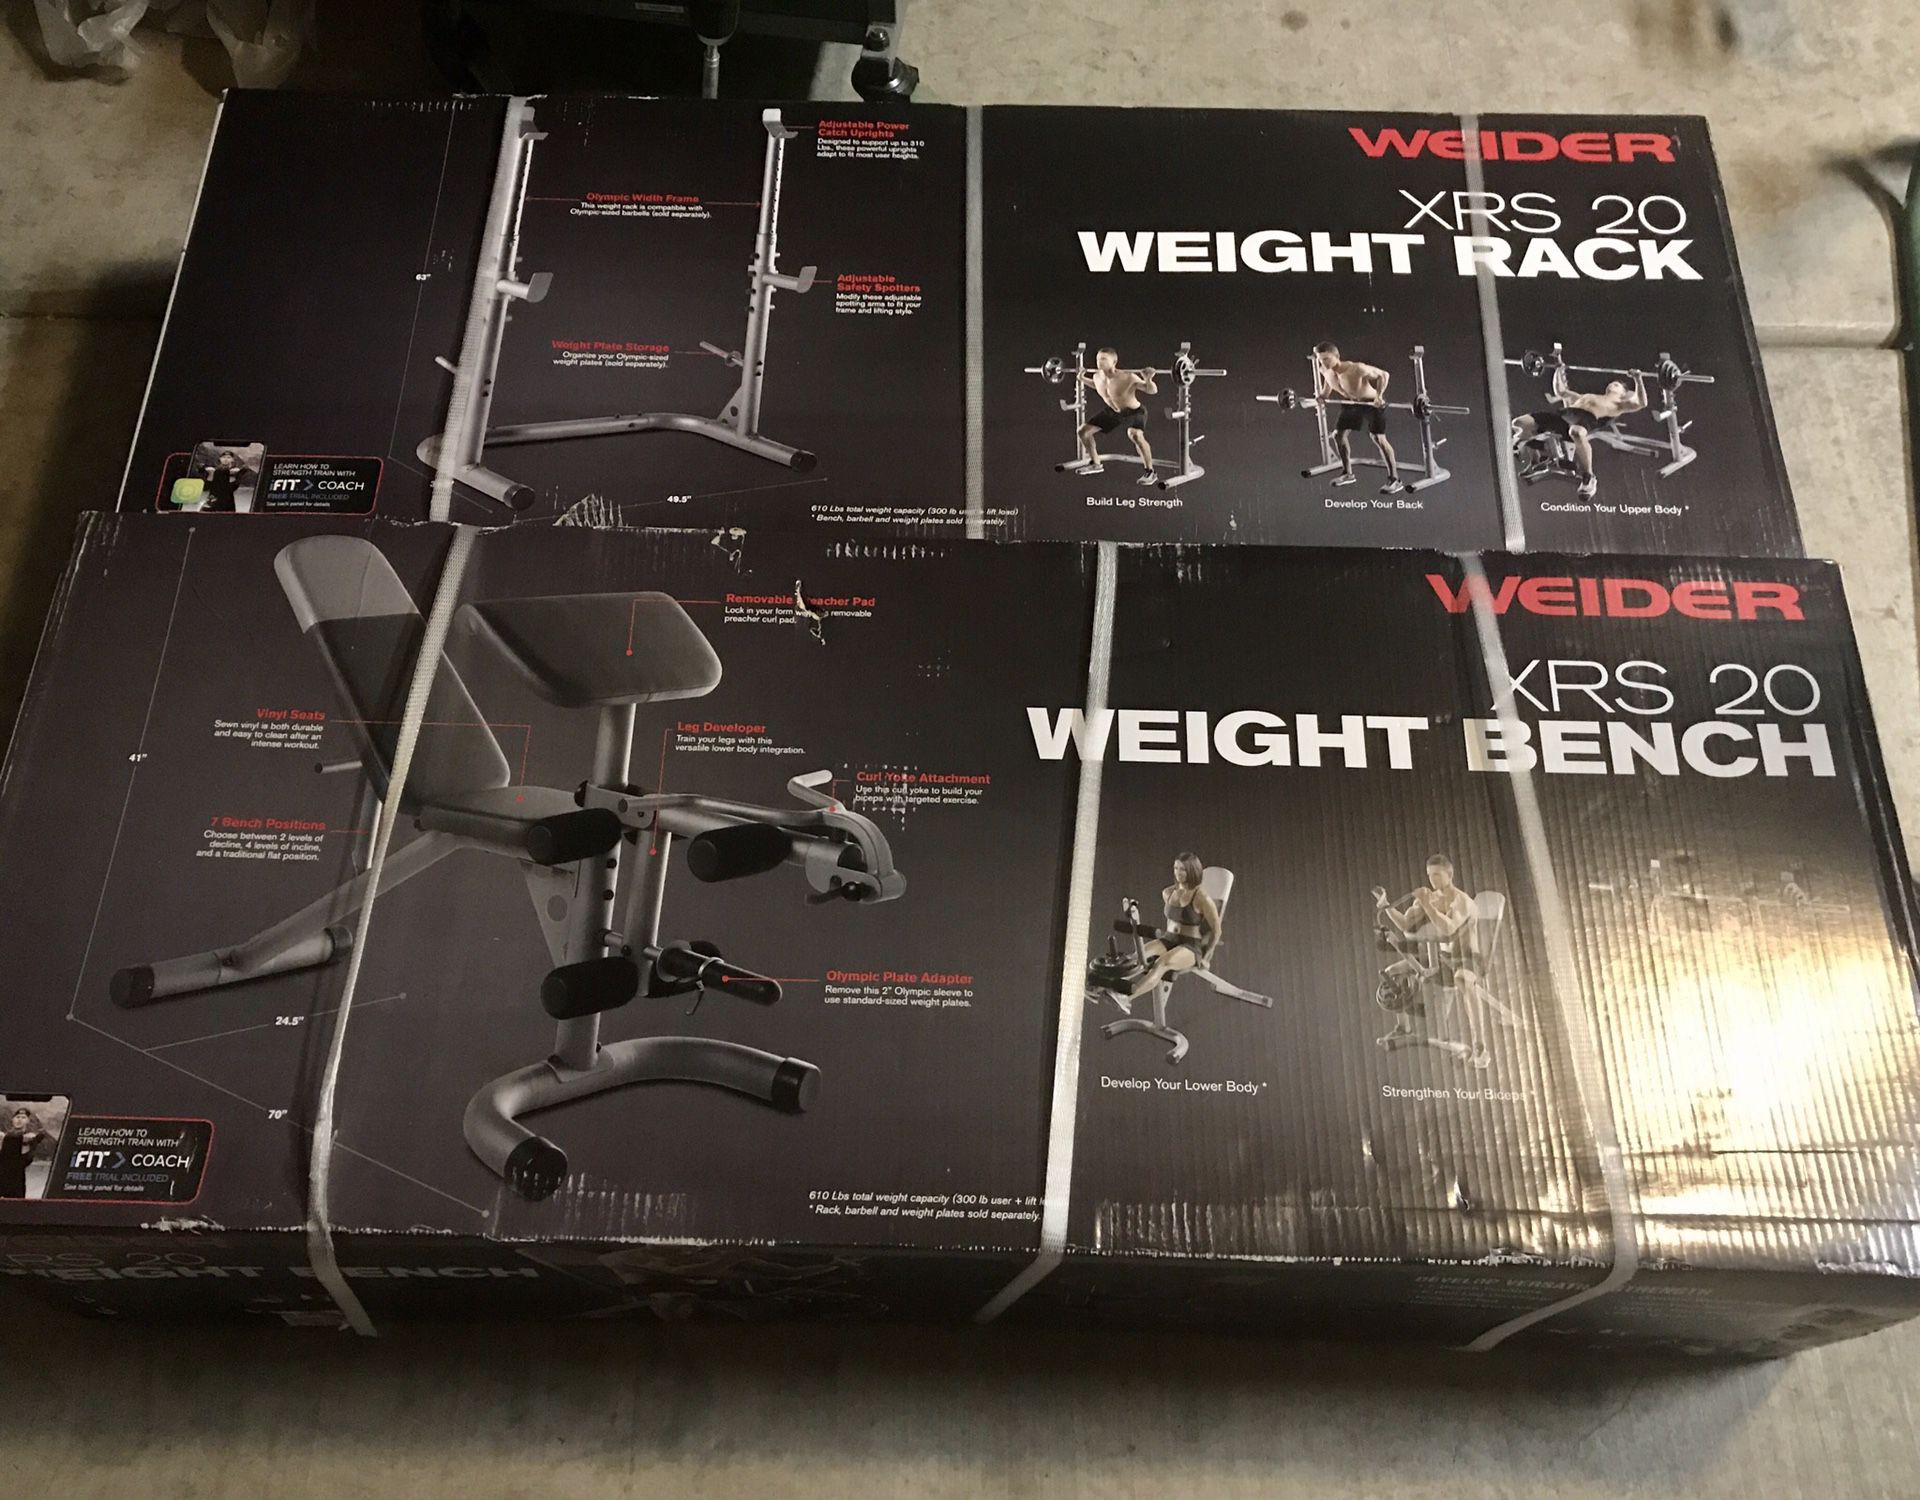 Olympic Weider XRS 20 Weight Bench and Squat Rack! New! Located in East Mesa near Signalbutte and Elliot